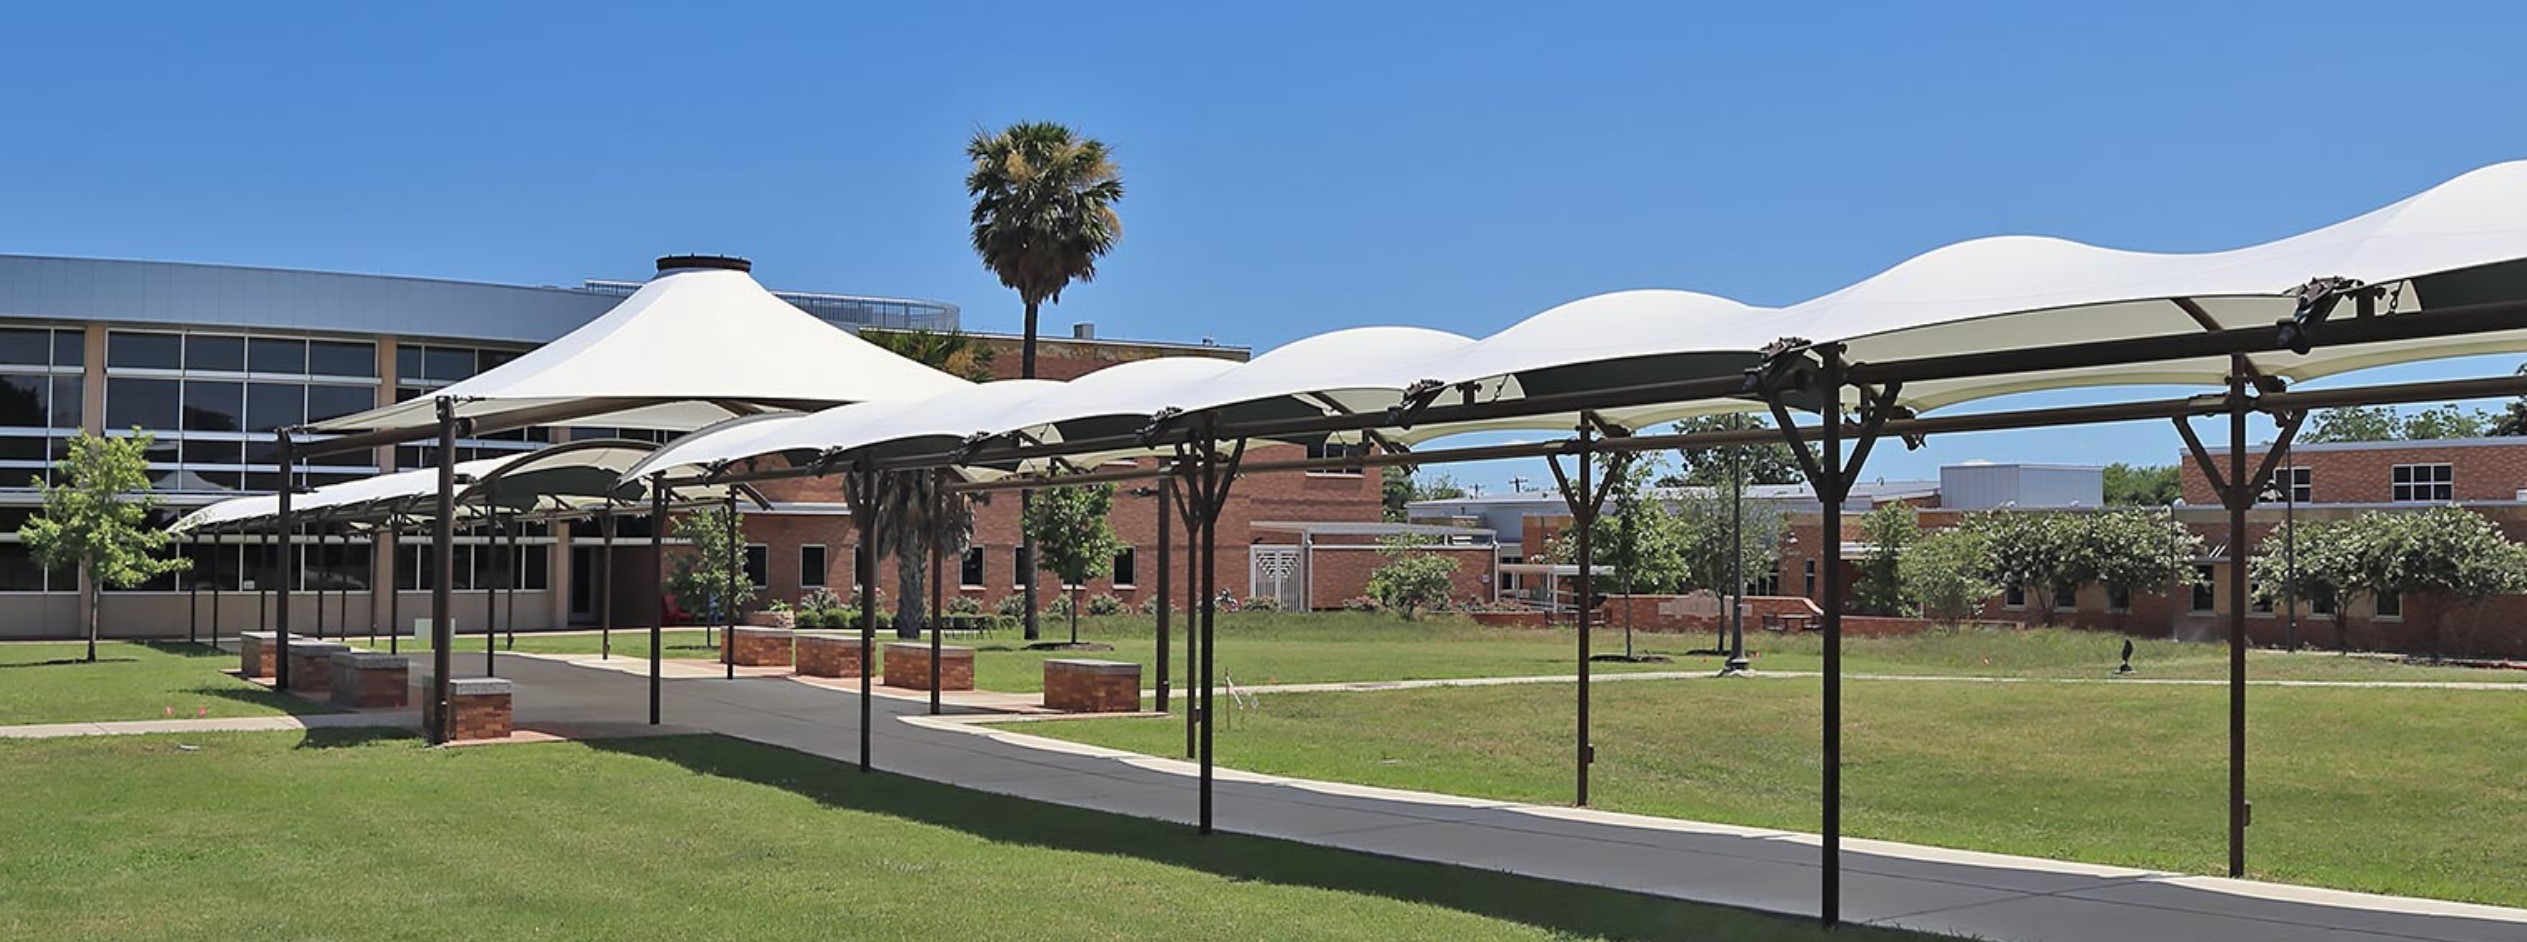 commercial awning tensile membrane structure